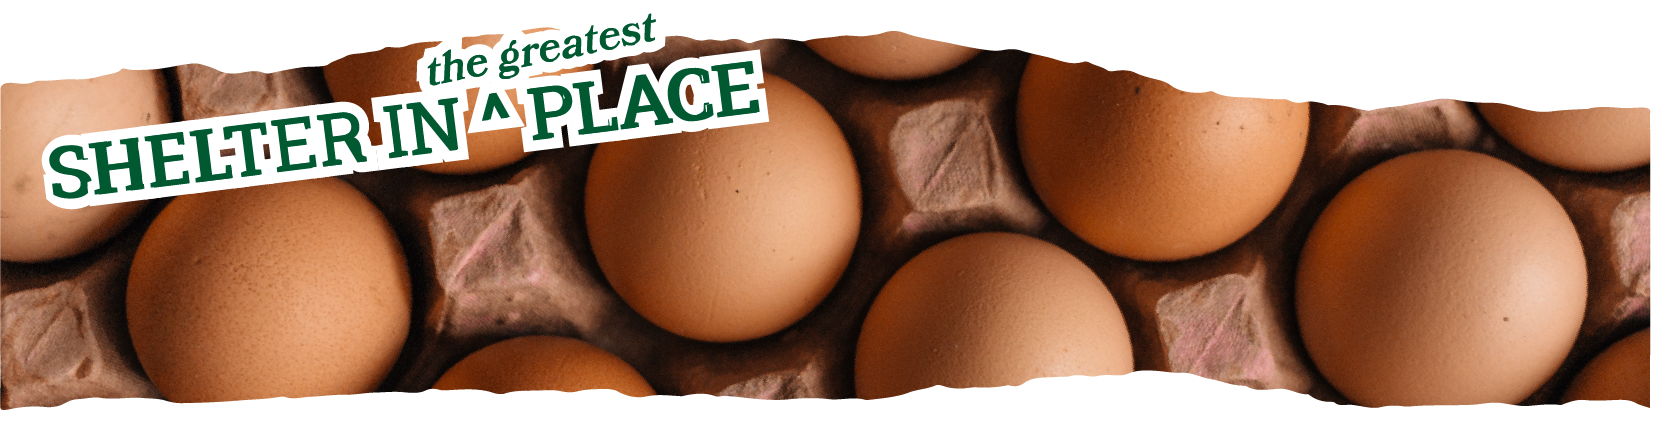 Title text: Shelter in the greatest place laid over a photo of eggs in a carton, one of the ingredients Rachel will offer substitutions and alternatives for in baking.